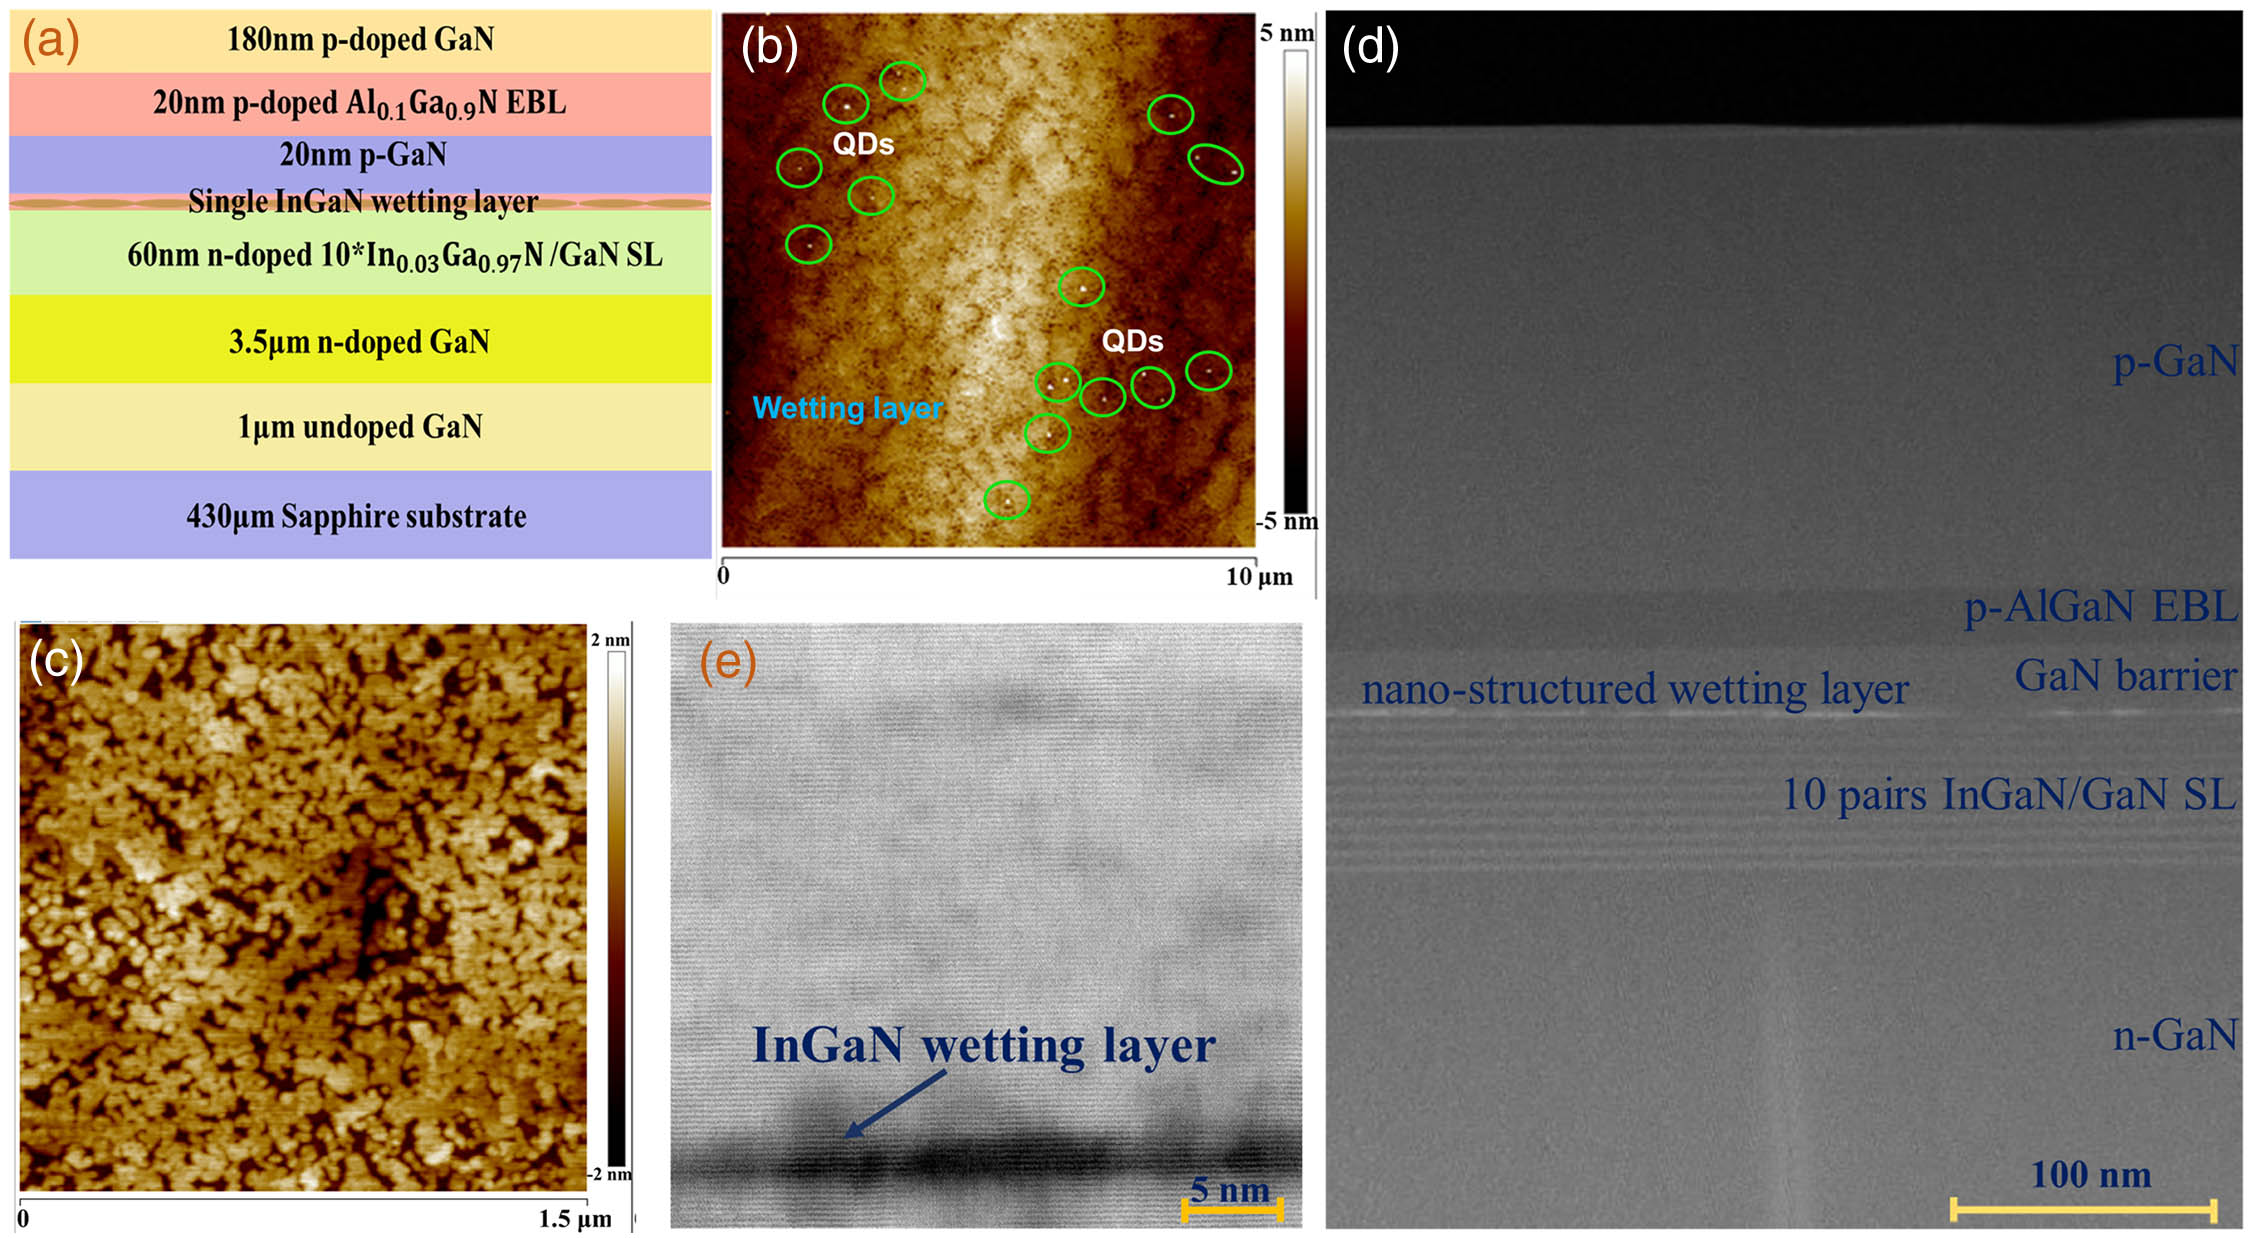 (a) Schematic of the epitaxial structure of the wetting layer LED. (b) A 10 μm × 10 μm AFM image of the bare wetting layer sample. (c) A 1.5 μm × 1.5 μm AFM image of the nano-structured wetting layer. (d) A high-angle annular dark field scanning transmission electron microscope (HAADF STEM) image of the LED sample. (e) A magnified bright-field (BF) STEM image of the wetting layer region.